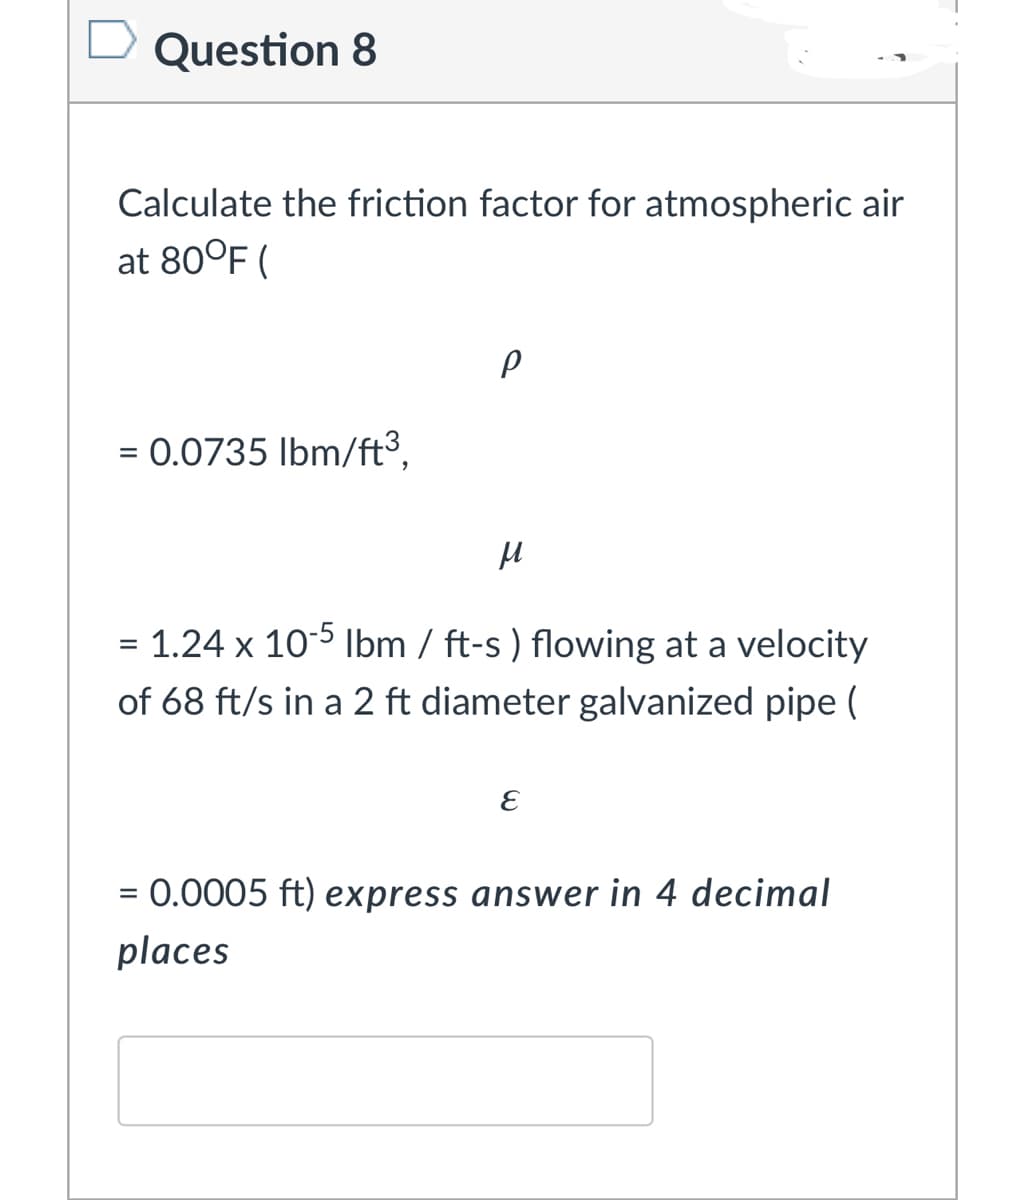 Question 8
Calculate the friction factor for atmospheric air
at 80°F (
= 0.0735 Ibm/ft³,
= 1.24 x 105 Ibm / ft-s ) flowing at a velocity
of 68 ft/s in a 2 ft diameter galvanized pipe (
= 0.0005 ft) express answer in 4 decimal
places
